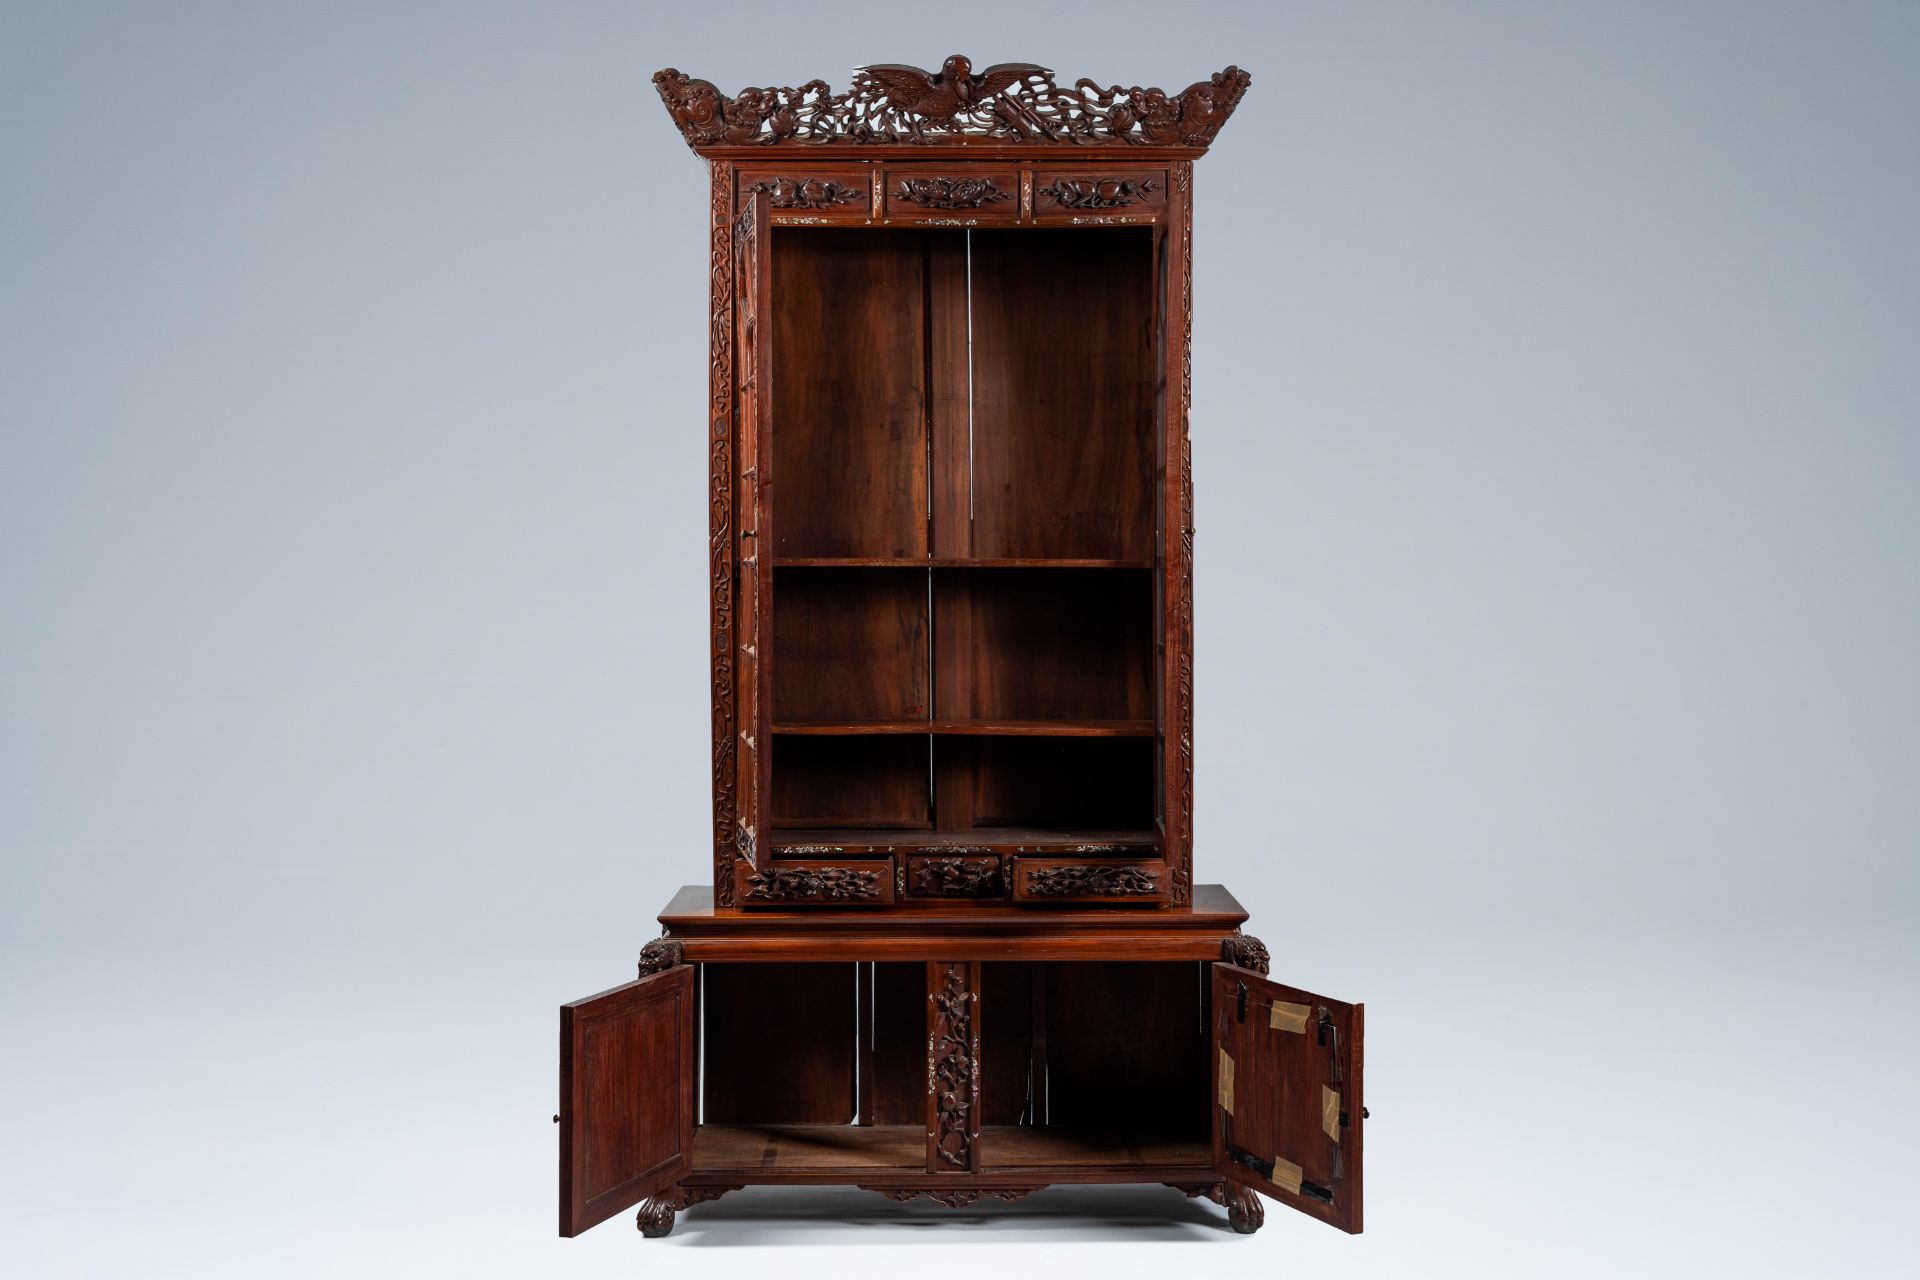 A Chinese or Vietnamese wooden four-door display cabinet with mother-of-pearl inlay, ca. 1900 - Image 3 of 15